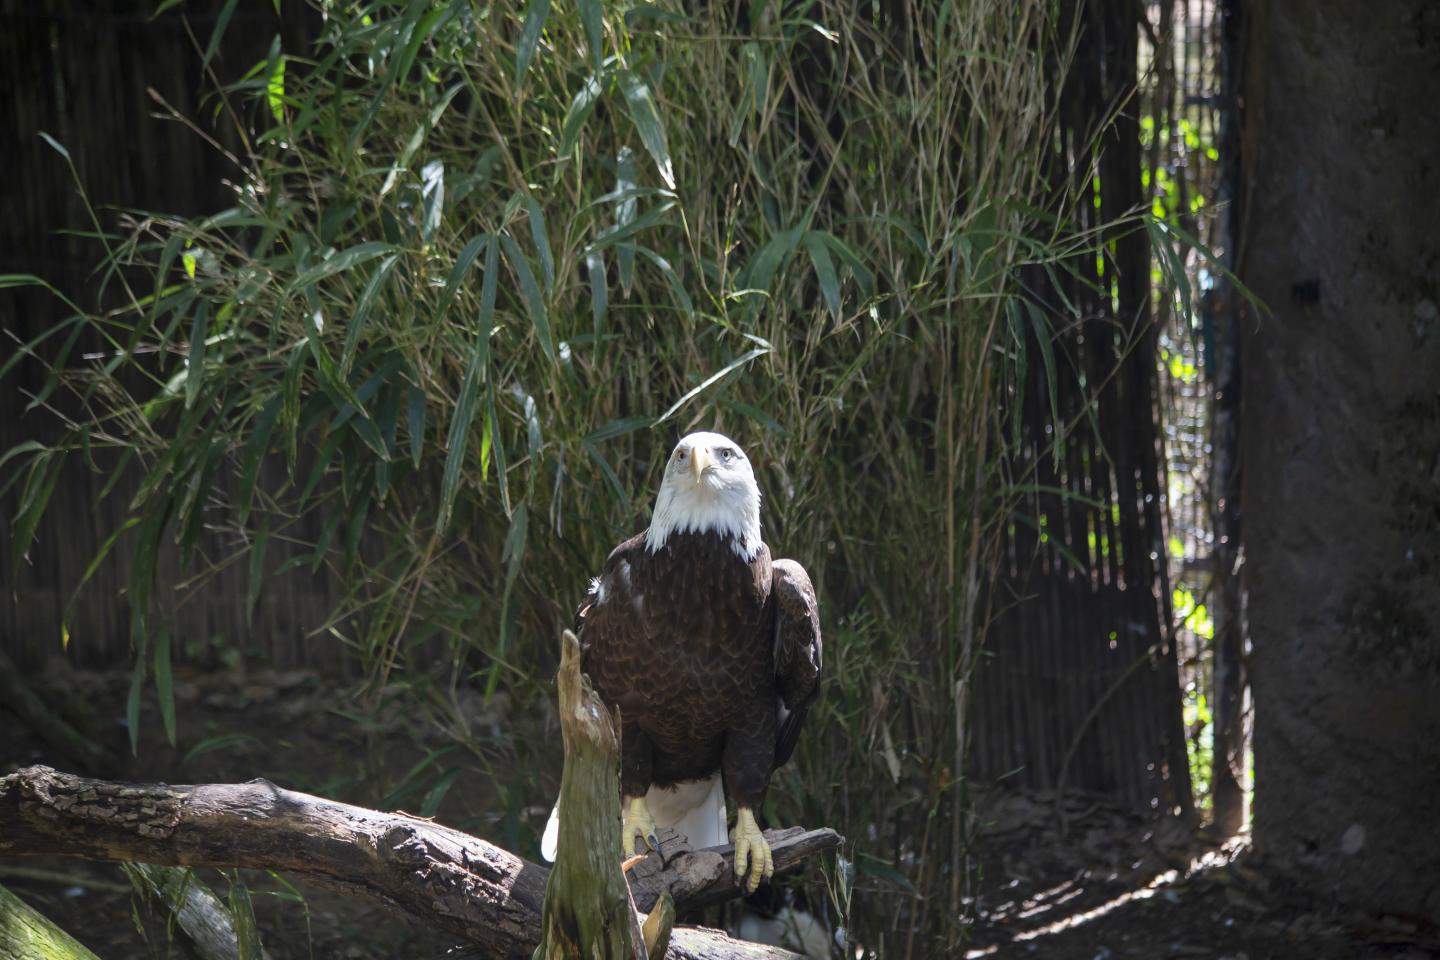 A bald eagle perched on a branch in the wetlands